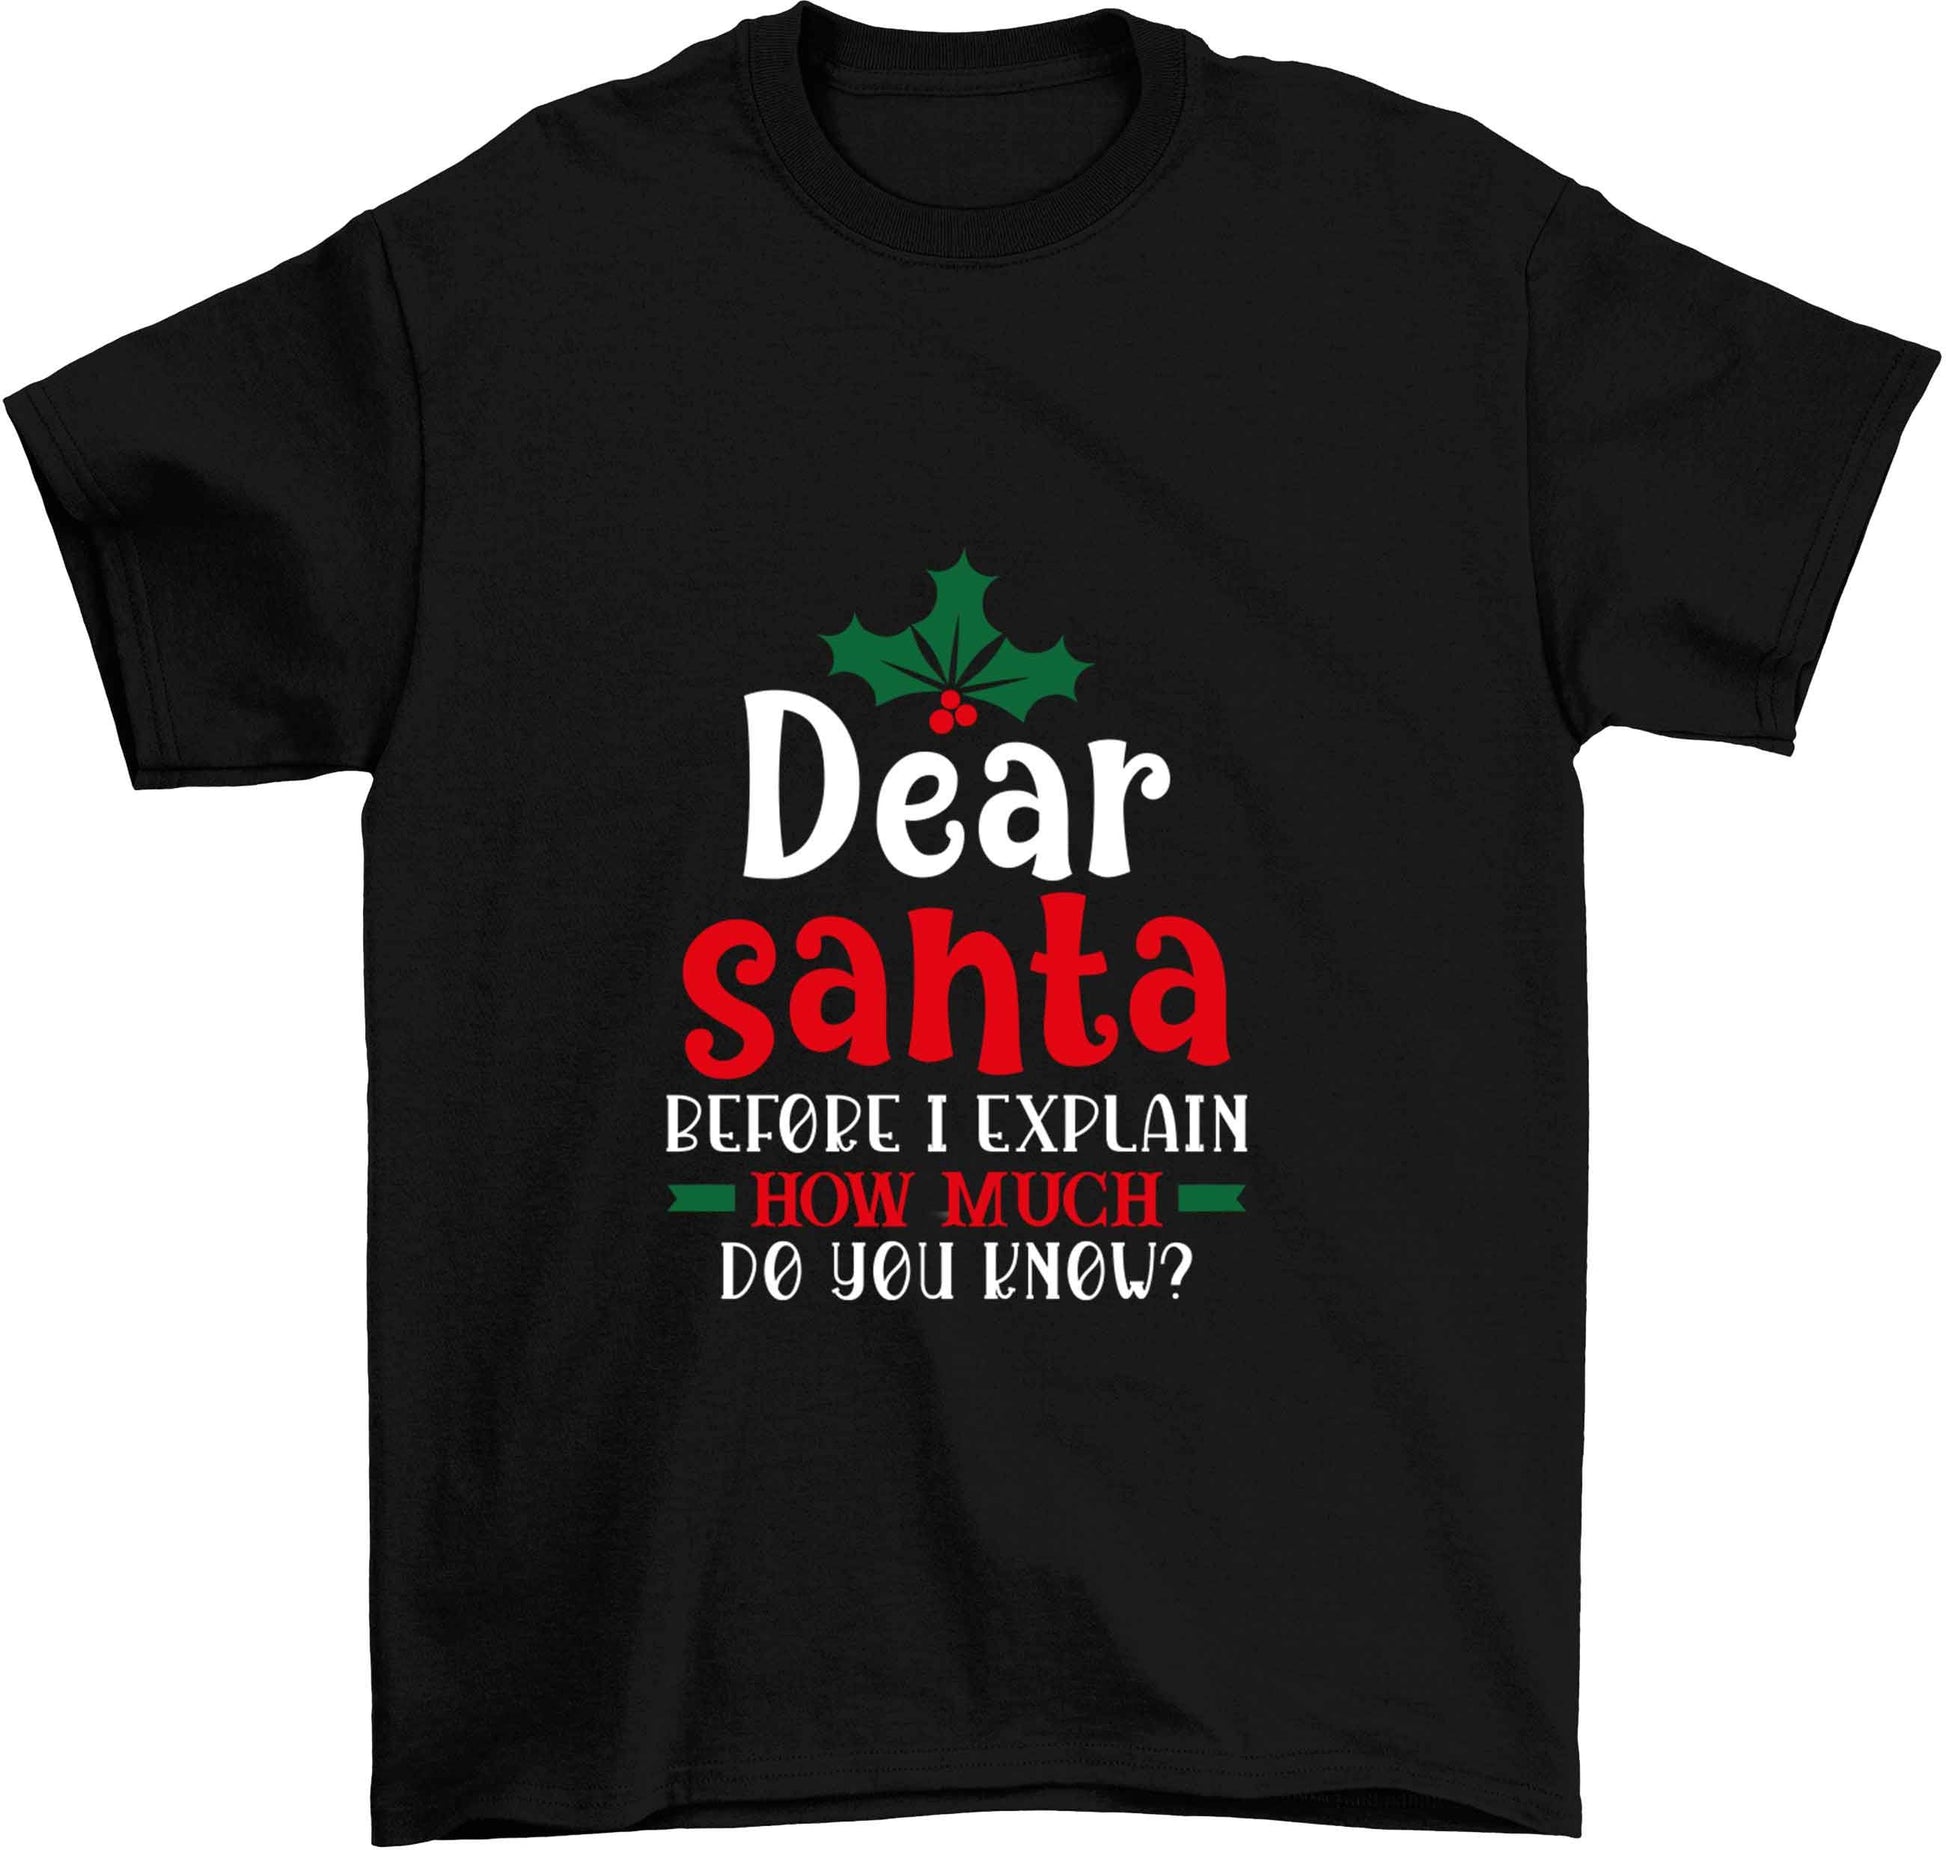 Santa before I explain how much do you know? Children's black Tshirt 12-13 Years